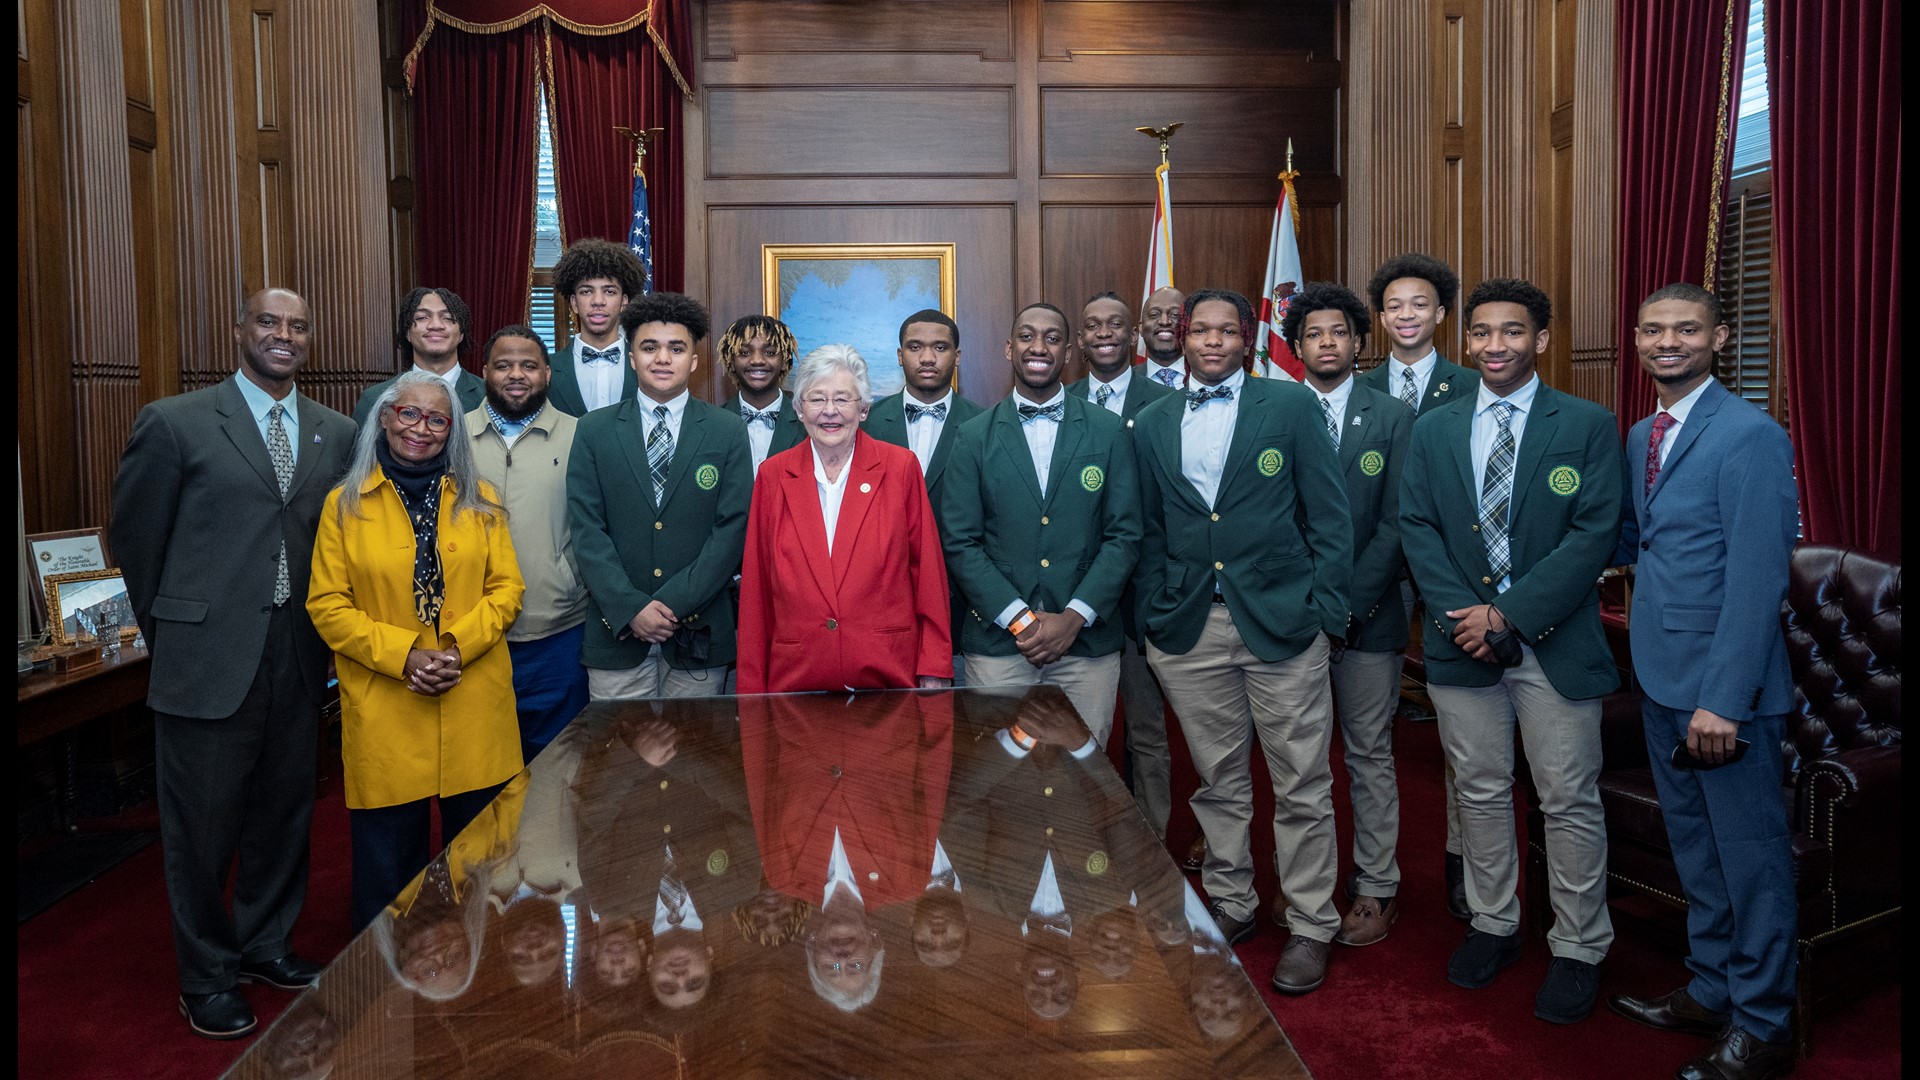 Governor Kay Ivey this morning hosted the Oakwood Adventist Academy boys basketball team for a meeting in her office.